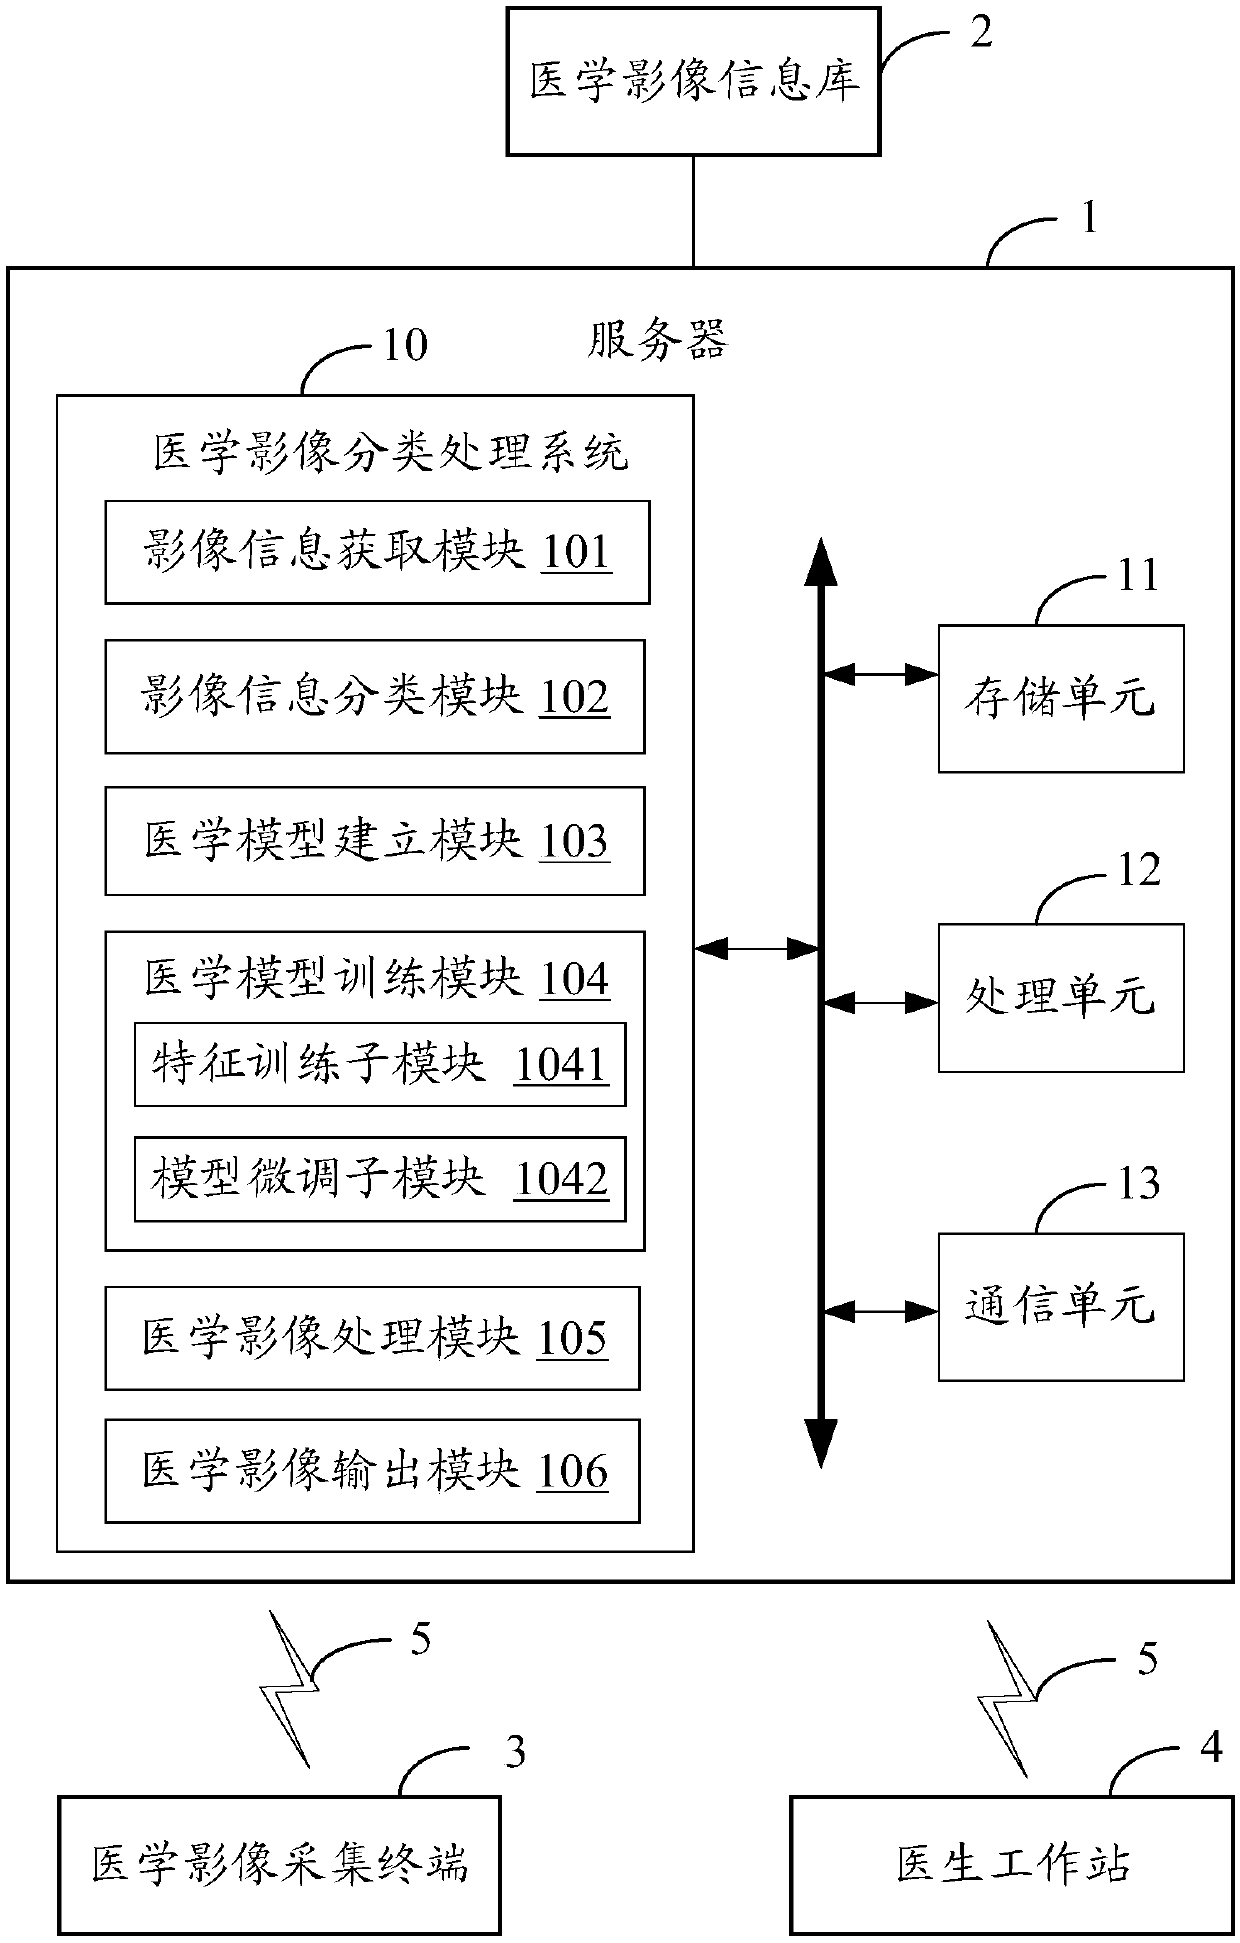 Medical image classification processing system and method based on artificial intelligence